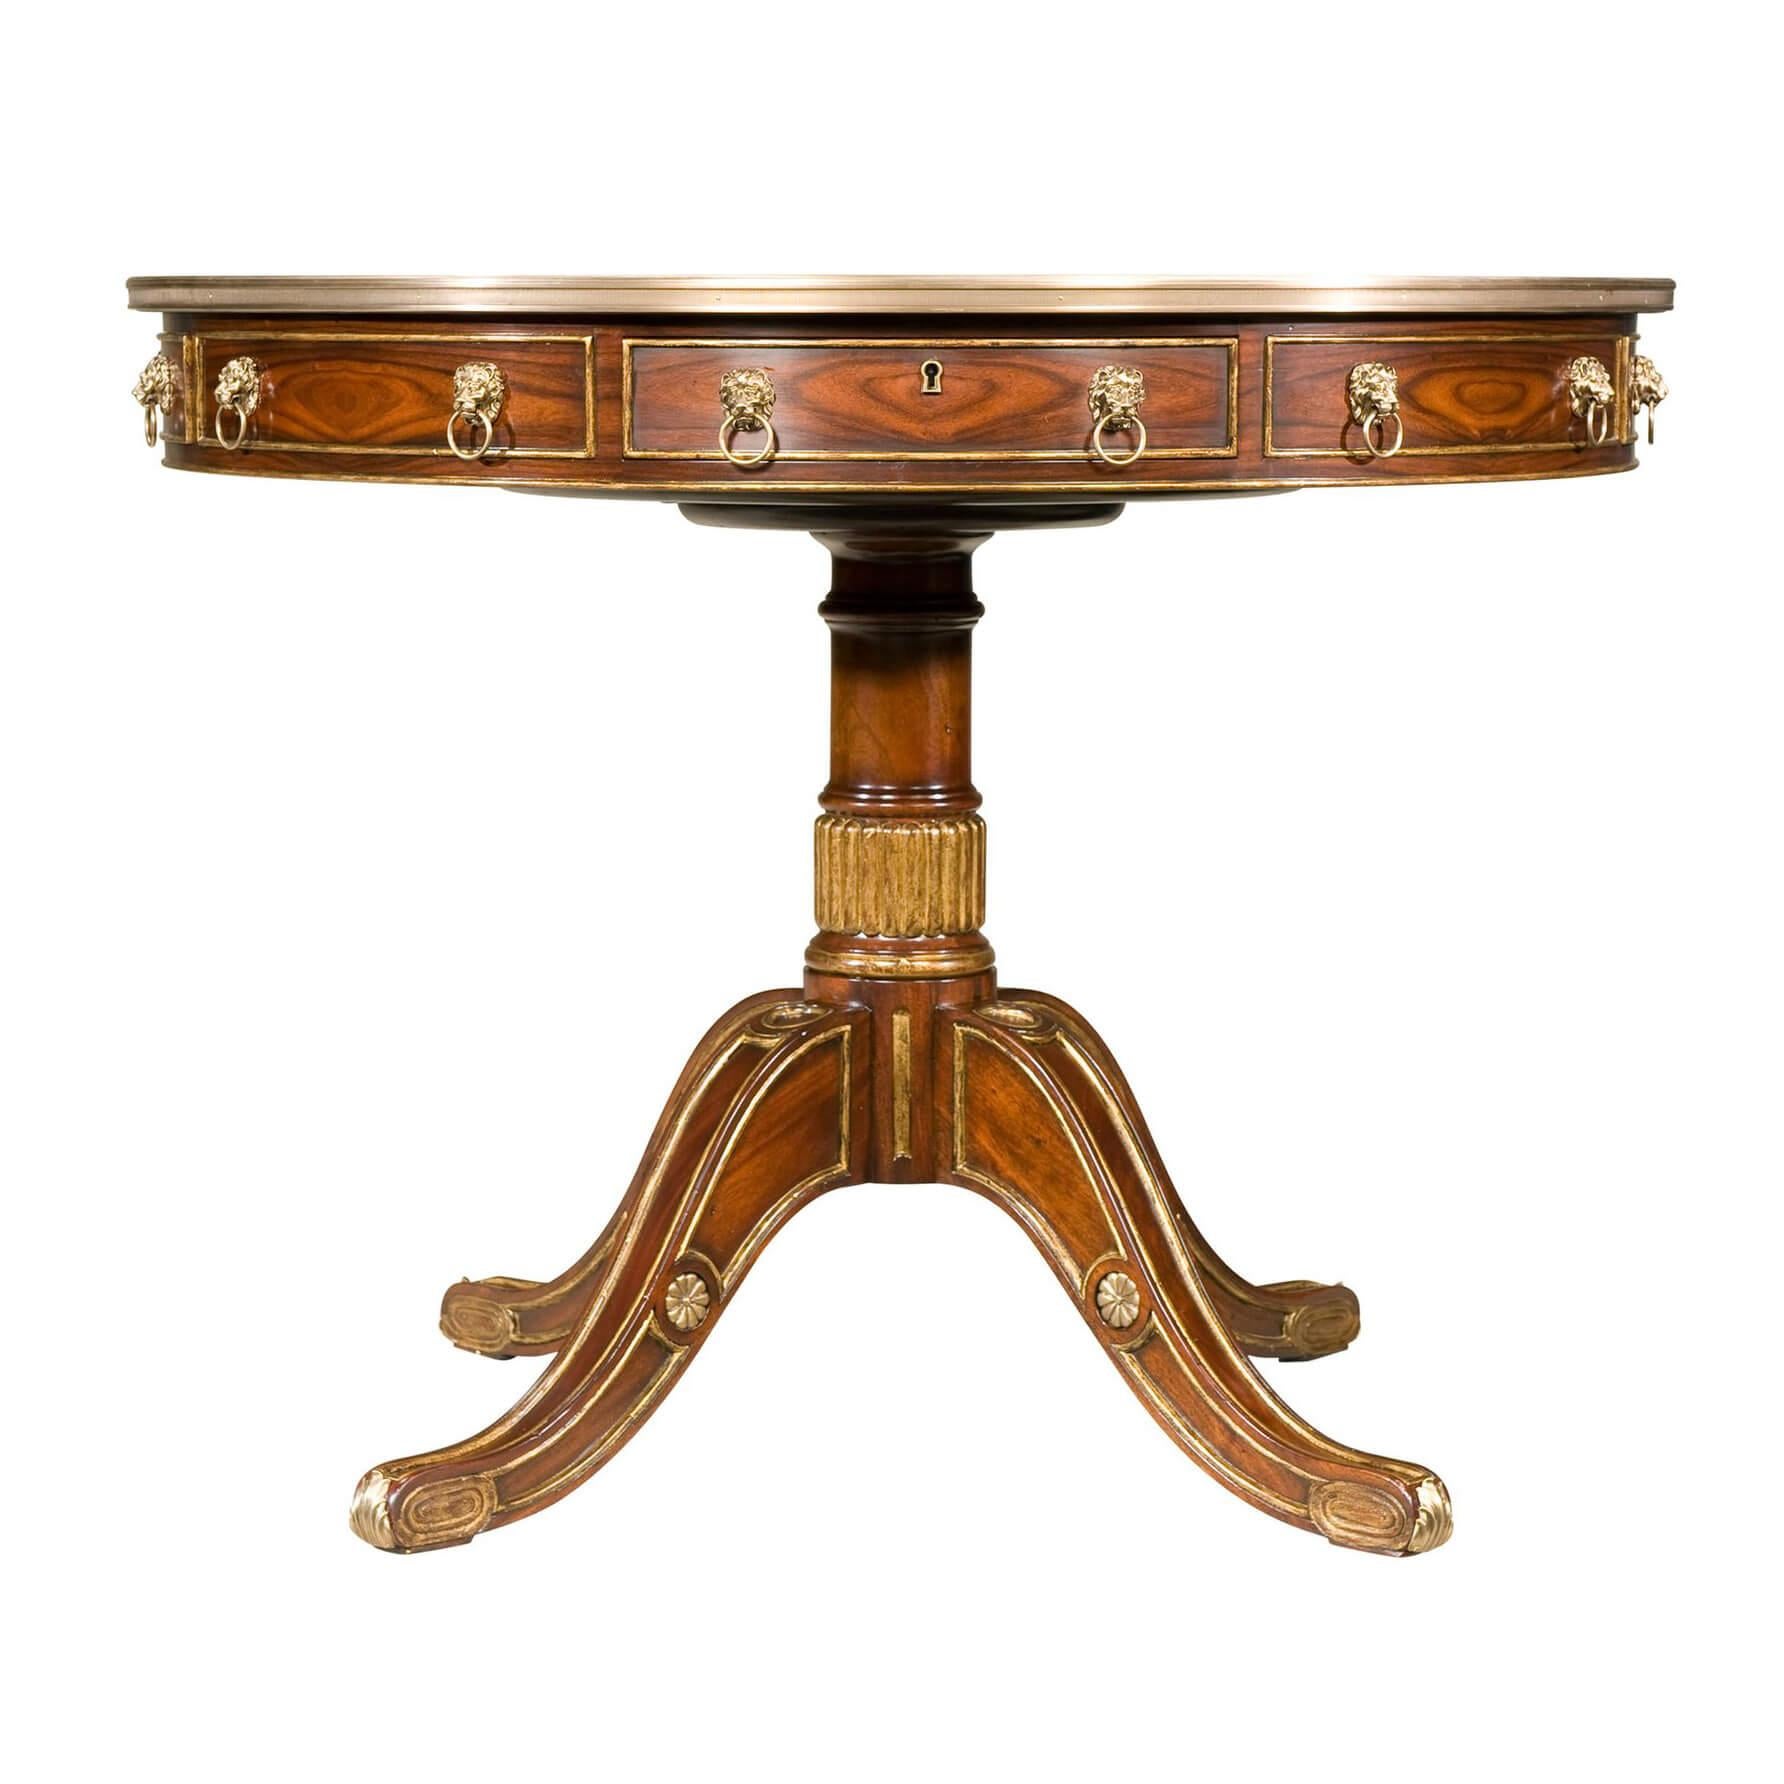 A rosewood and parcel gilt drum top table with mahogany crossbanding, the circular brass bound top above a frieze with four bowed drawers applied with brass lion mask handles and interspersed by four dummy drawers, on a turned and reeded mahogany